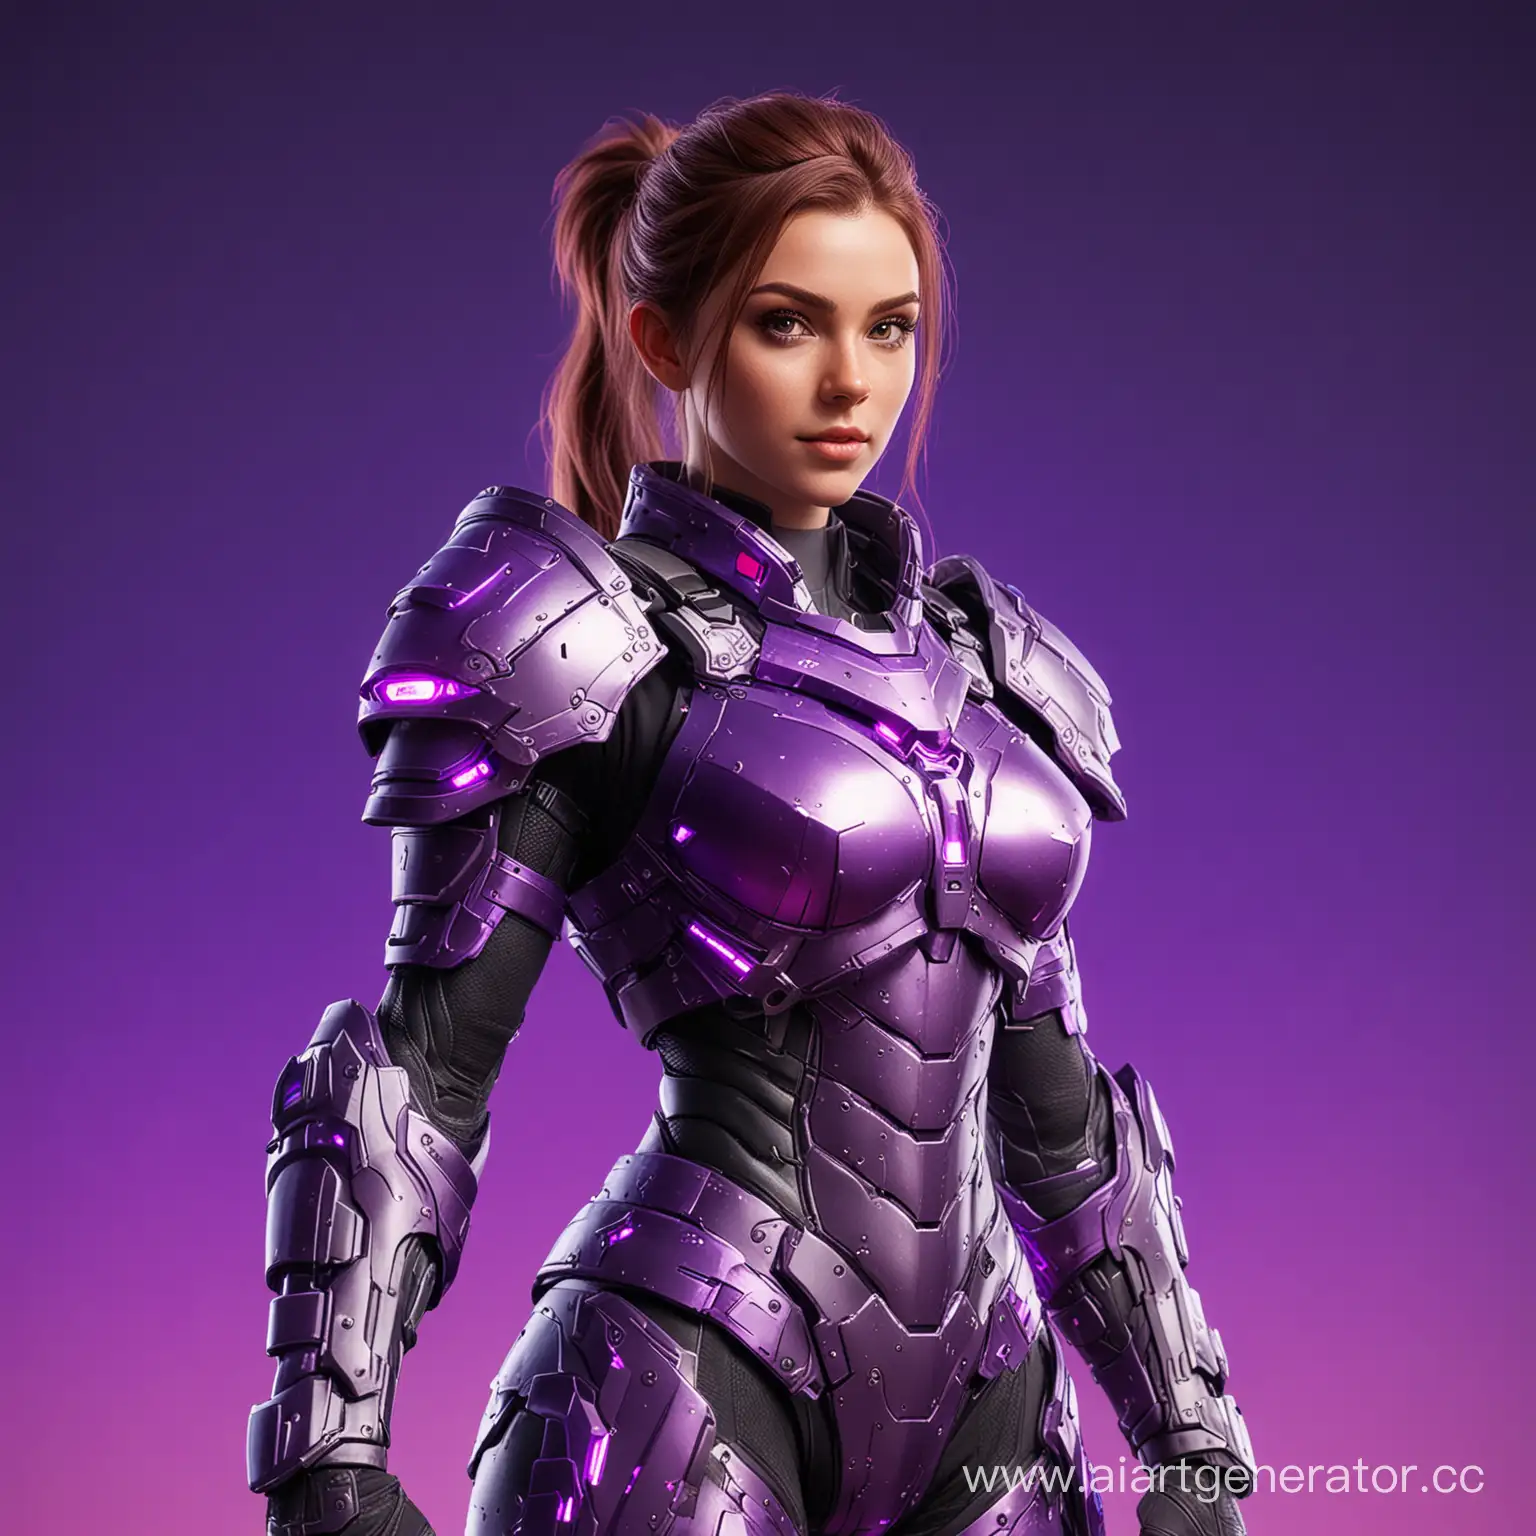 Fantasy-Gaming-Character-in-Vibrant-RGB-Armor-Against-a-Stunning-Purple-Background